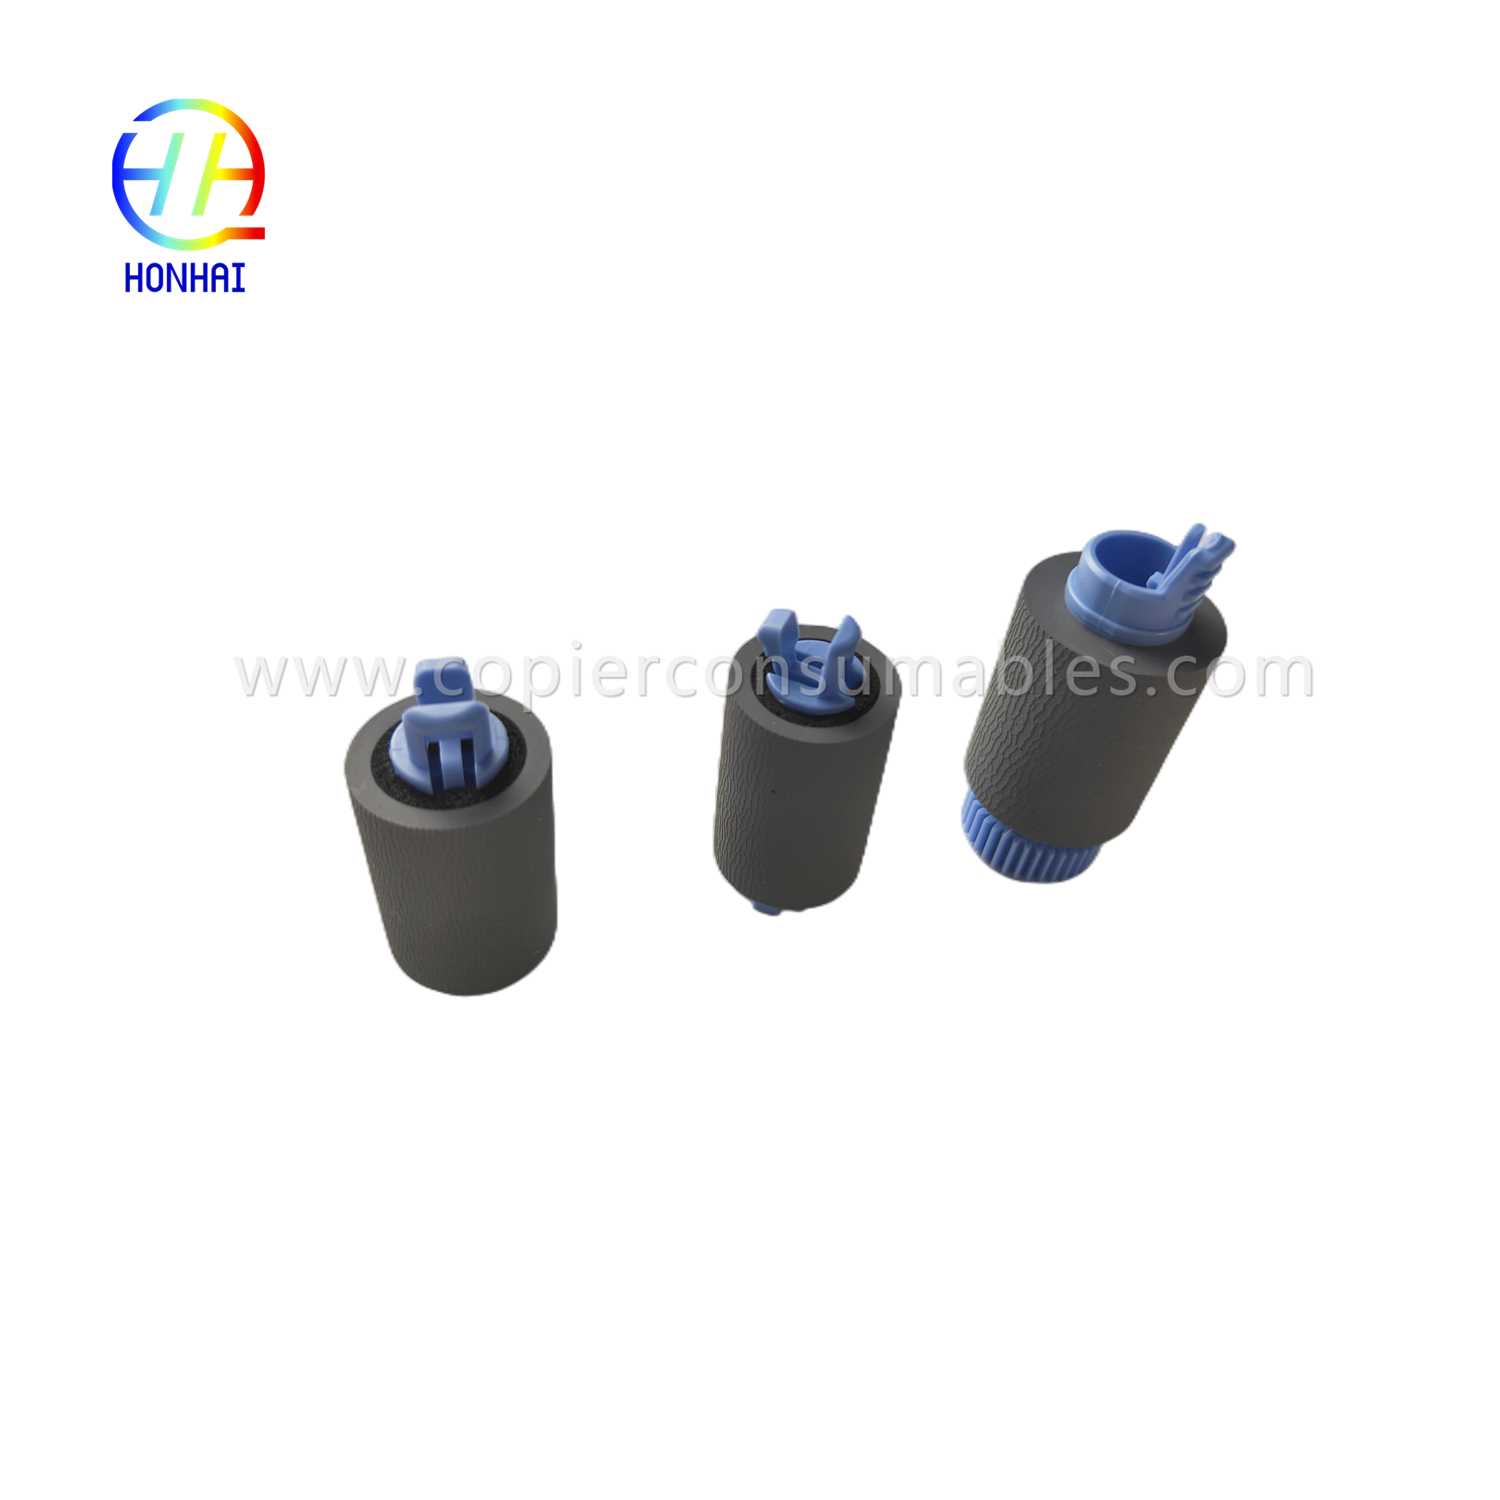 https://www.copierconsumables.com/tray-2-5-pickup-feed-separation-roller-set-for-hp-a7w93-67082-mfp-785f-780dn-e77650z-e77660z-e77650dn-607dn-707d p77750z-p77760z-p75050dn-p75050dw-product/